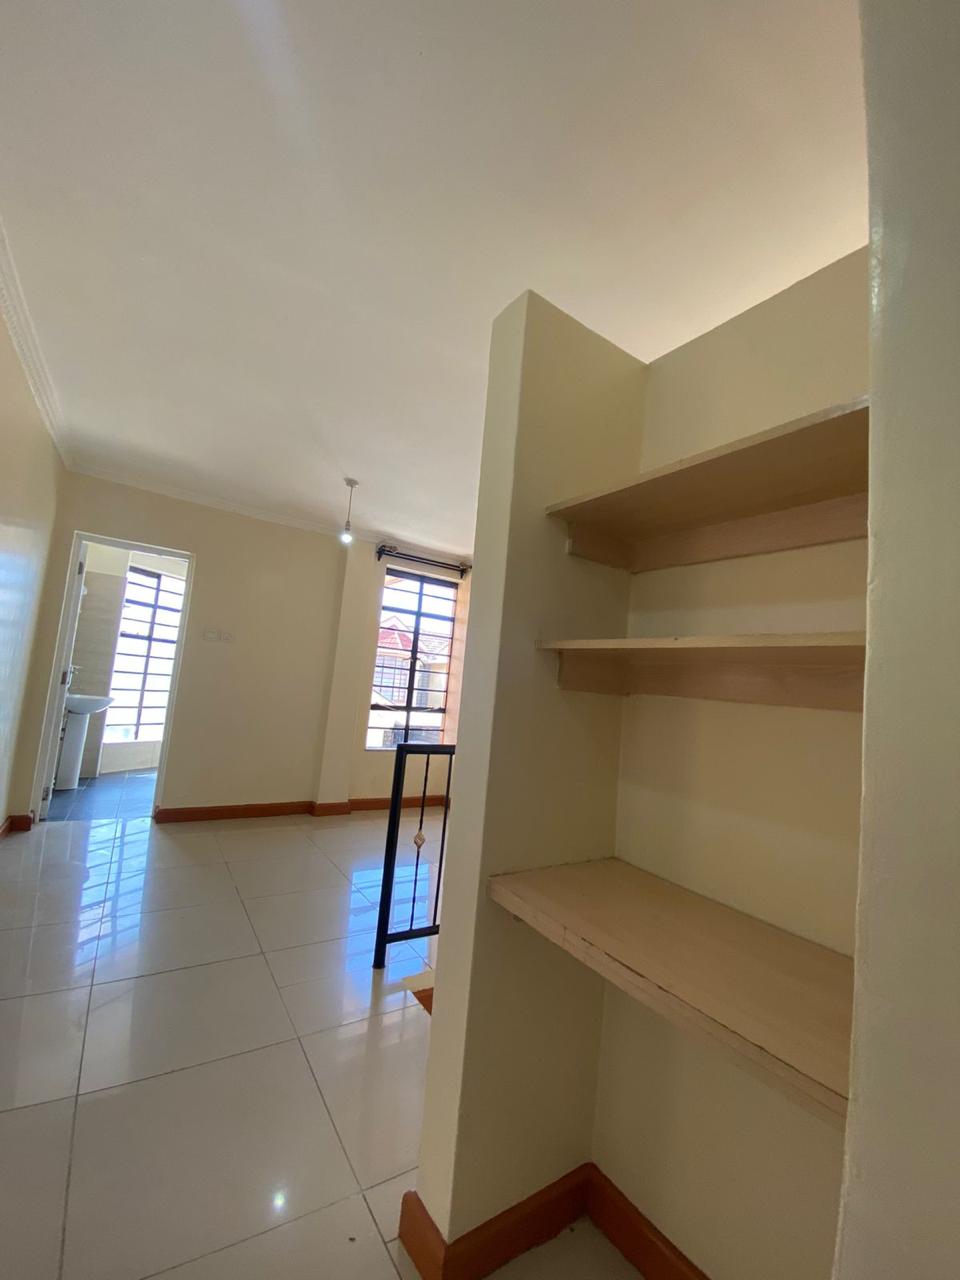 Pam Golding. Hass Consult. GTC. Eighty Eighty Nairobi. 3 bedroom townhouse plus dsq for sale in a gated community in Donholm, Nairobi. Close proximity to JKIA. Solar heated water. Price: 18M Musilli Homes